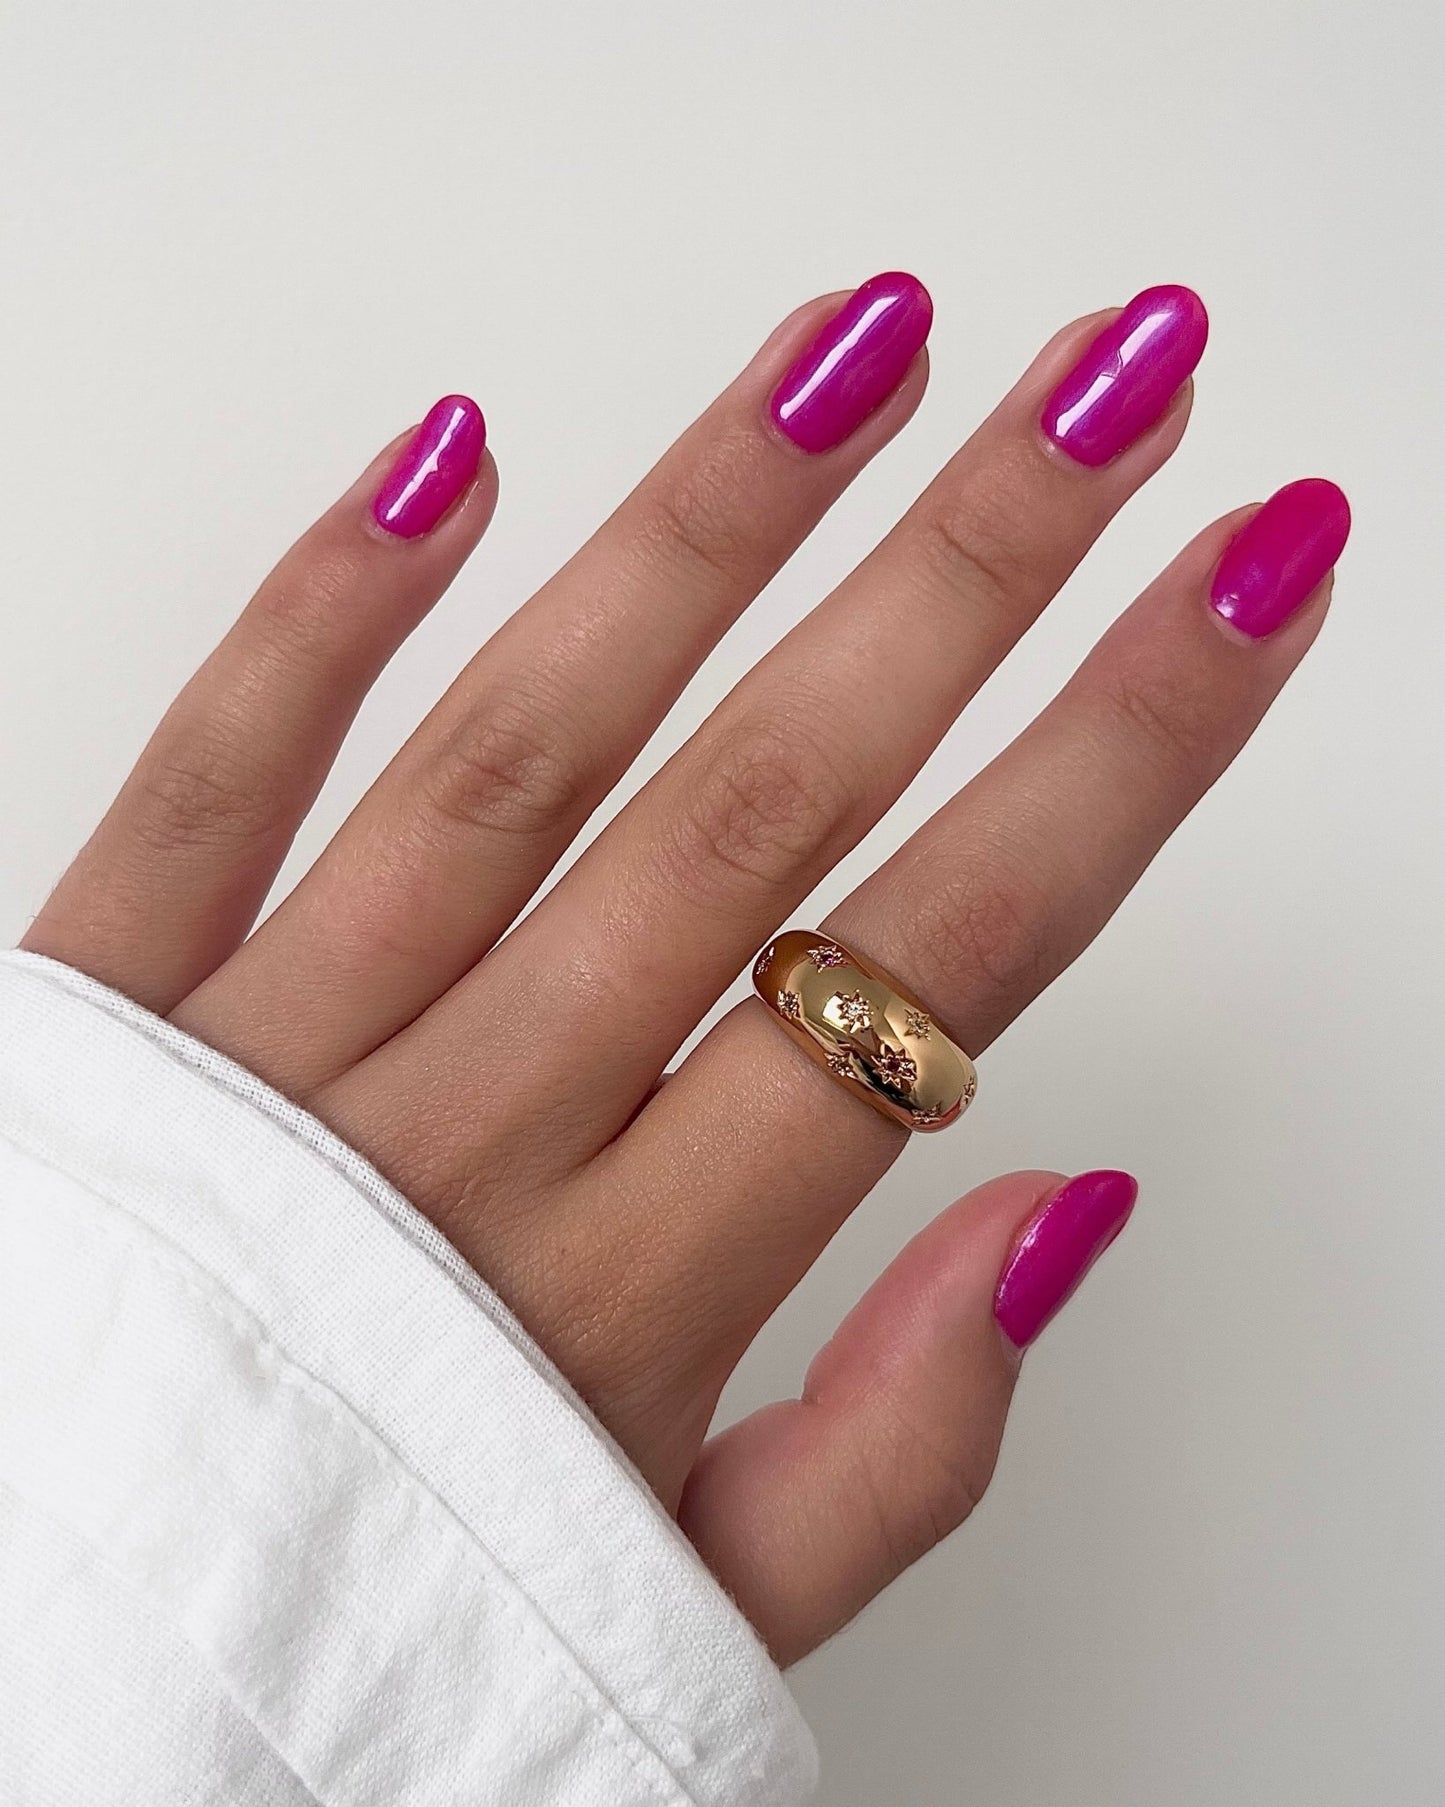 Completely in Love – Pink Gel Nail Polish